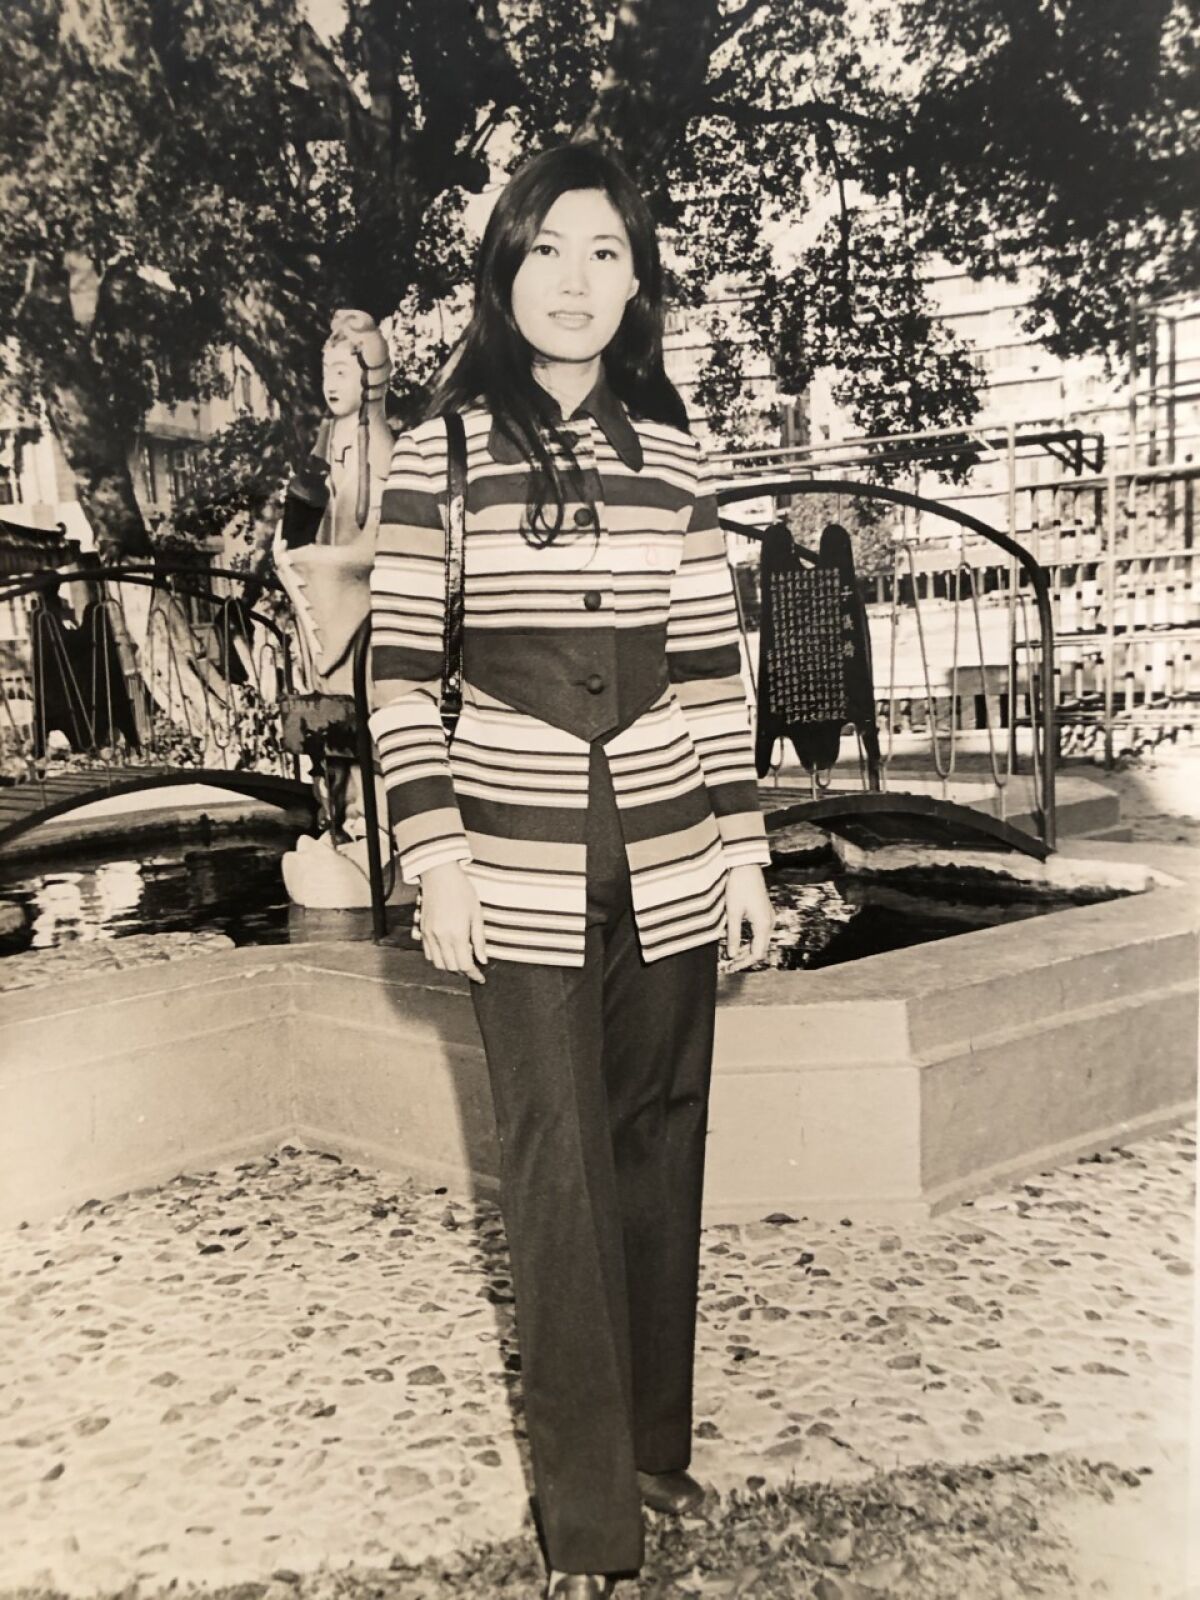 Flossie Wong-Staal is pictured during her early years in the United States.